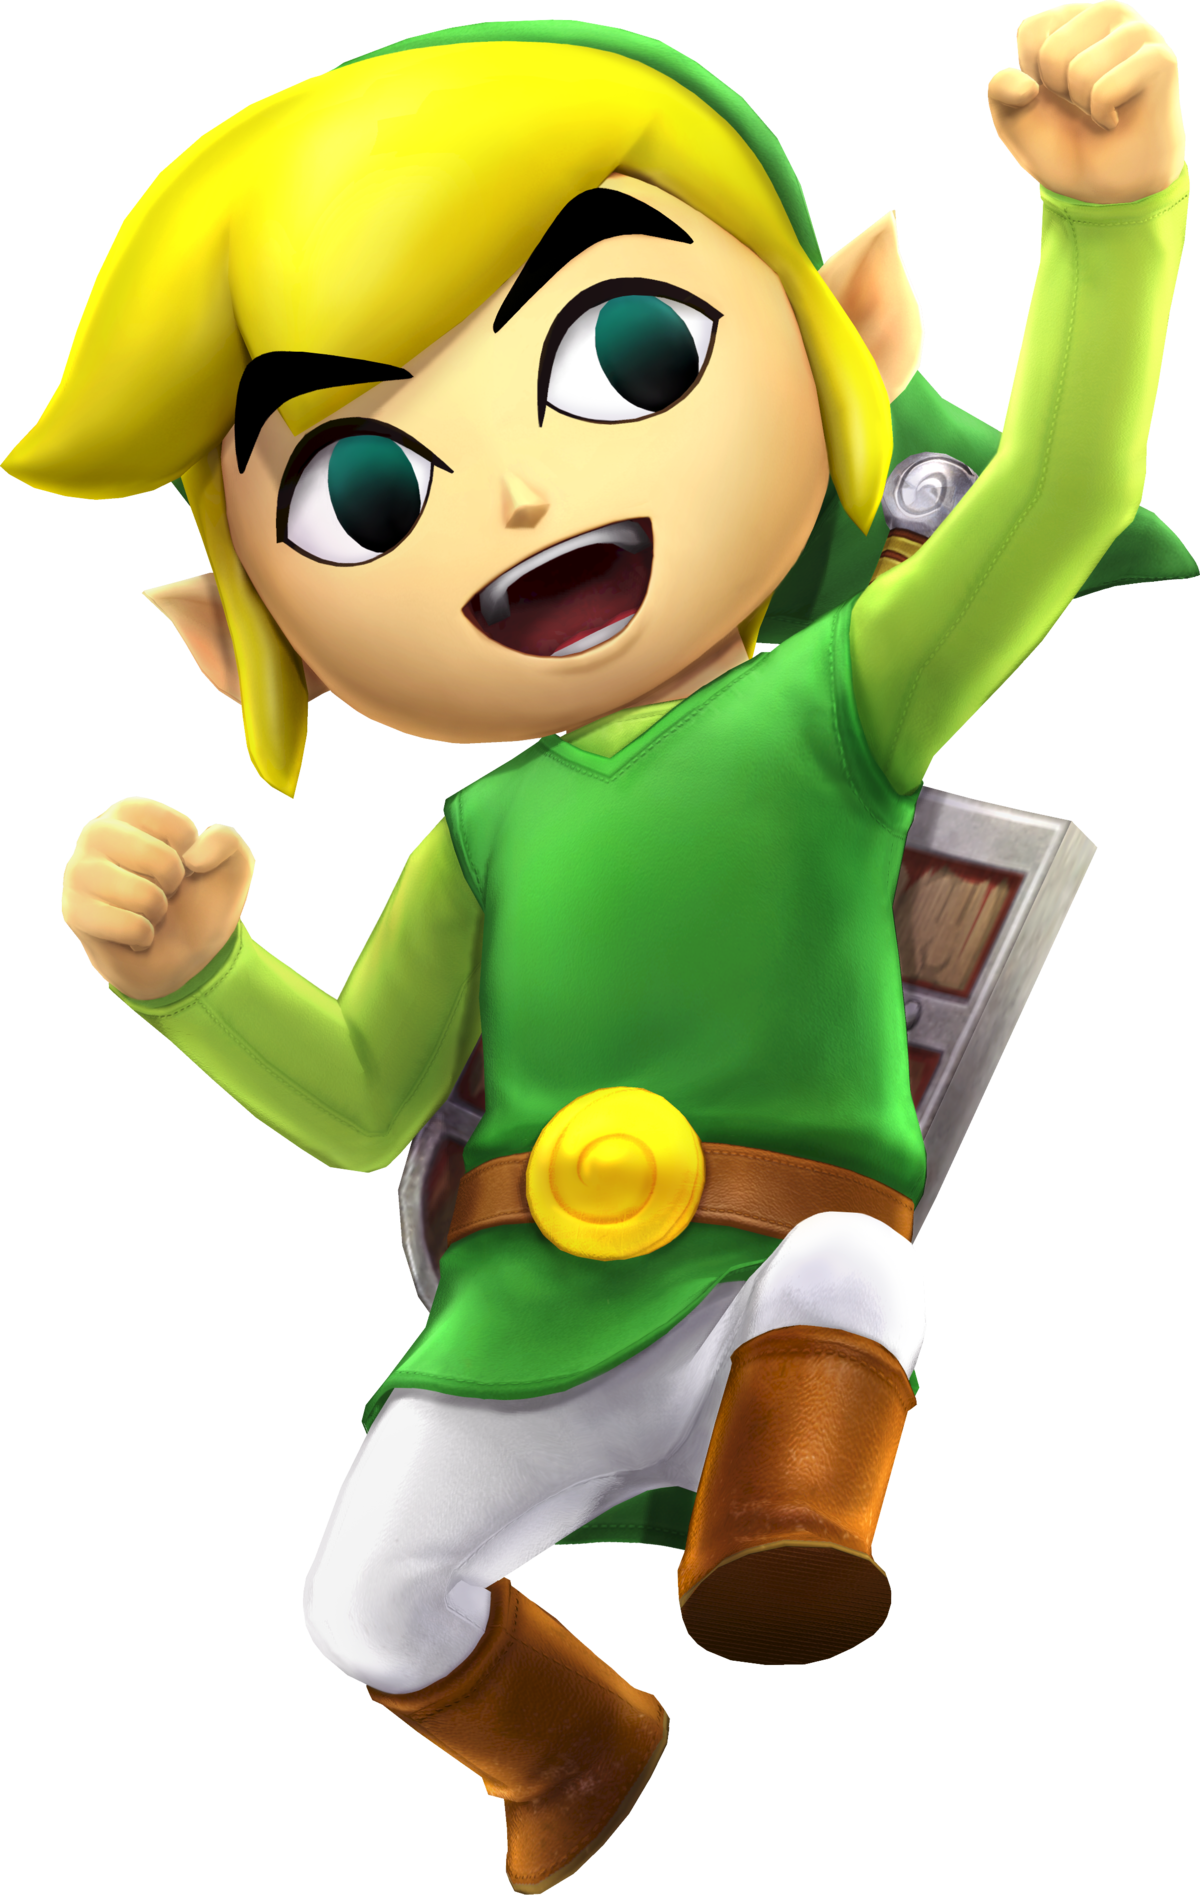 Related Coloring Pages - Toon Link Hyrule Warriors (1200x1895)